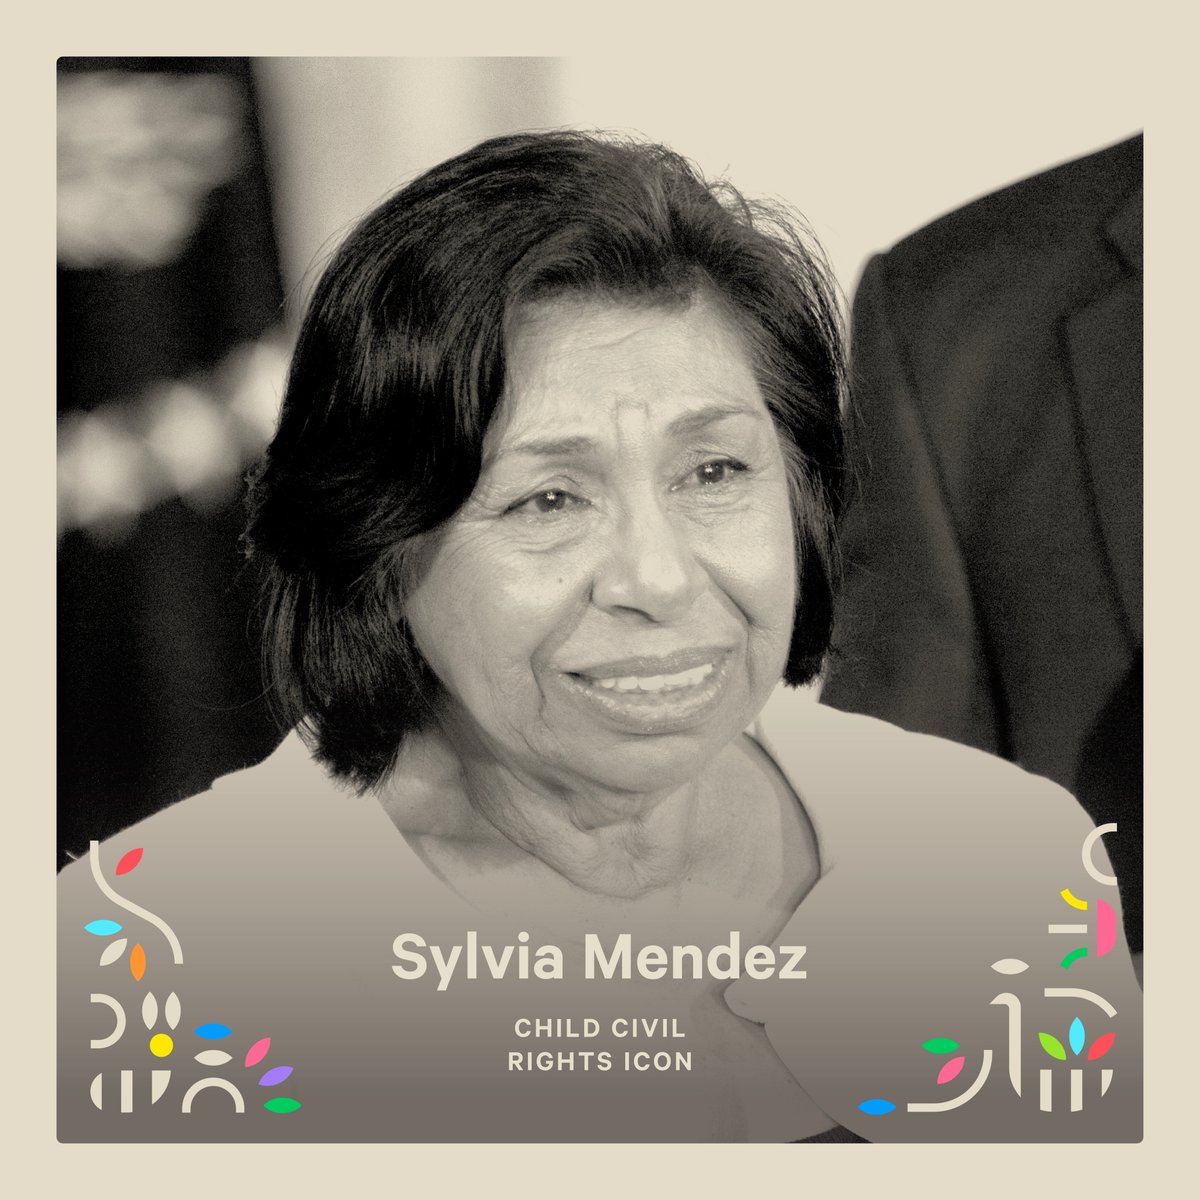 Sylvia Mendez was just 8 years old when she became a civil rights icon. Growing up in 1940s California as the daughter of Mexican & Puerto Rican immigrants, Mendez was a central figure in the landmark 9th Circuit Court of Appeals case Mendez v. Westminster.